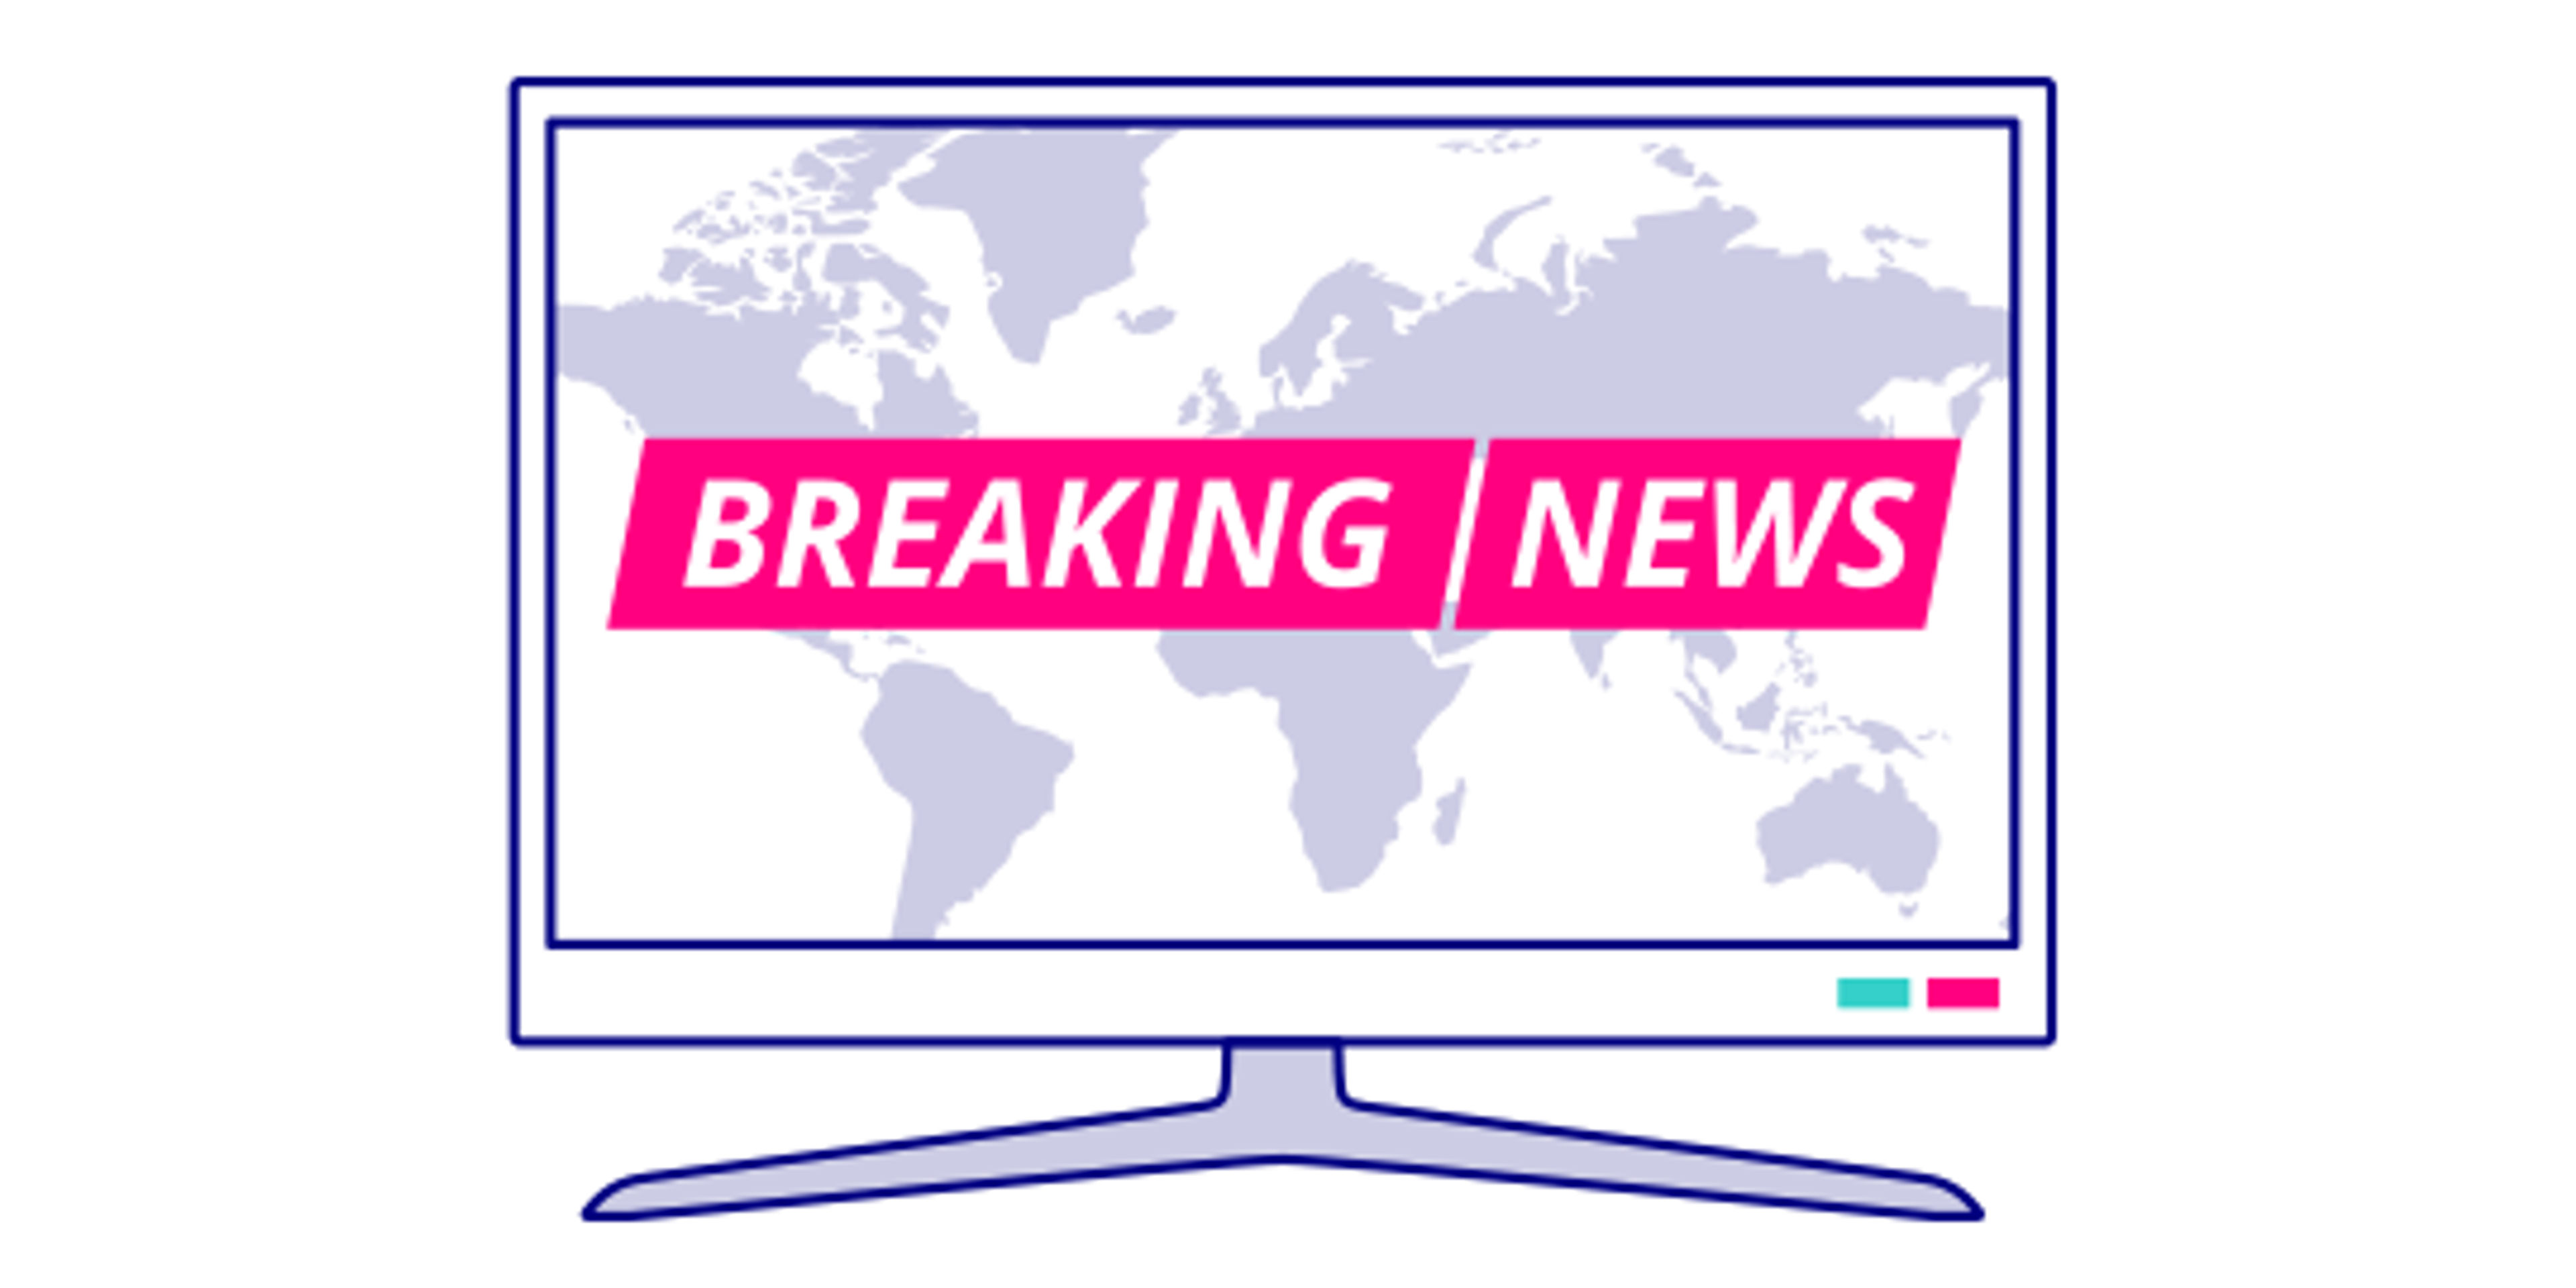 Illustration of a TV set with a 'Breaking News' graphic on screen